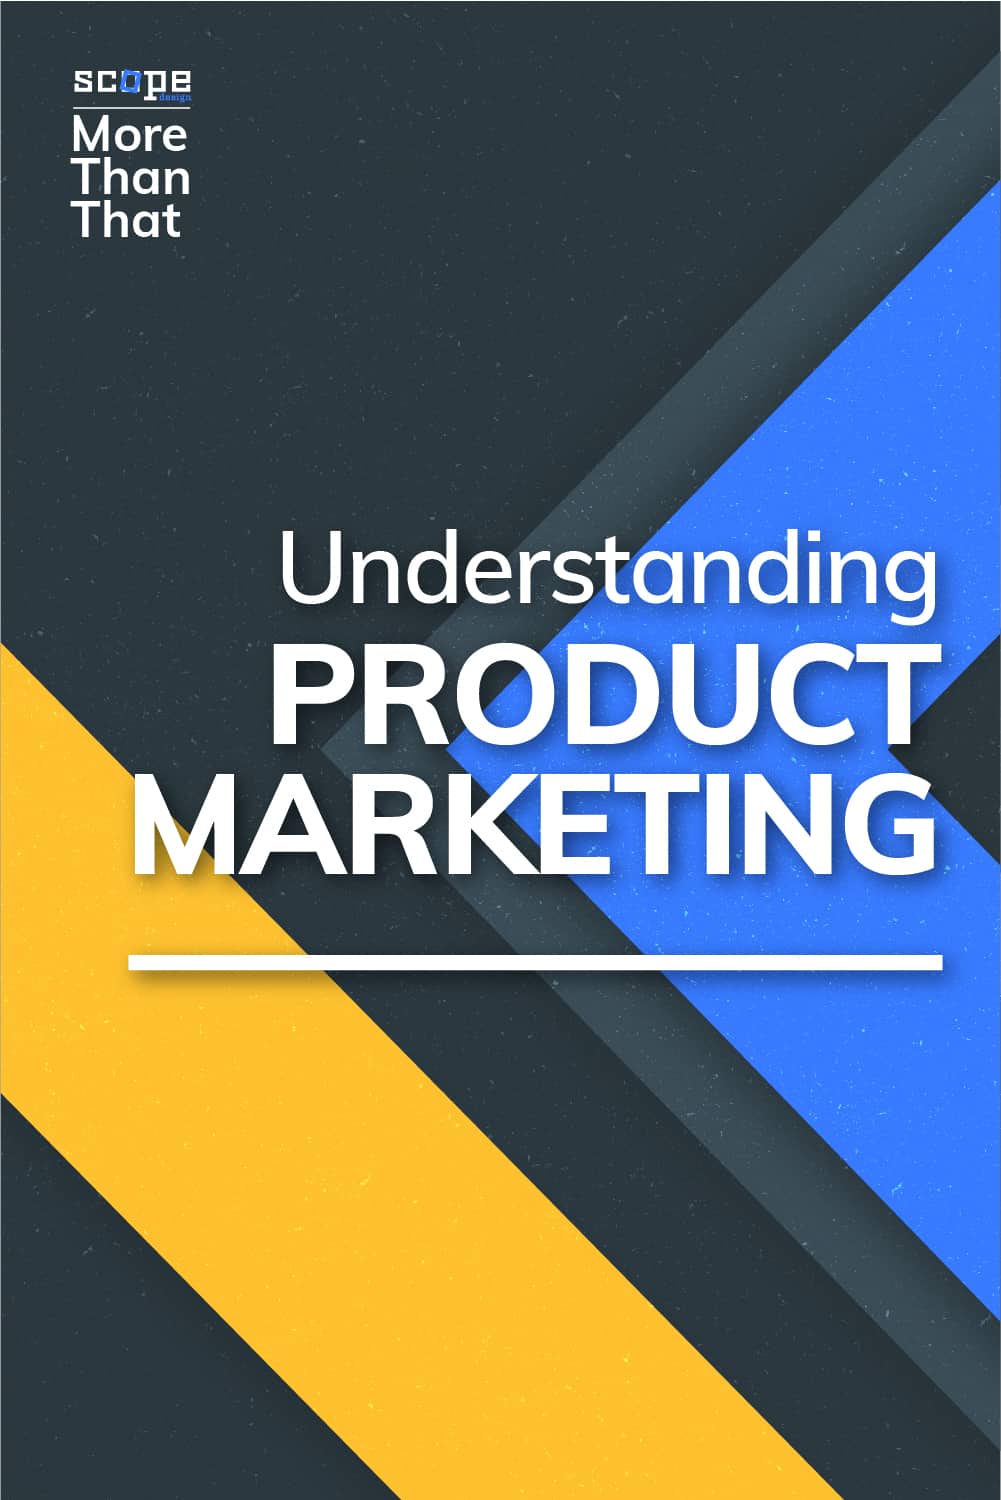 We hope you enjoy this month's More Than That Series! For the next couple of volumes we'll be sharing material and tips to help you better understand Product Marketing. Read on because... It's so much more than that! via @scopedesign